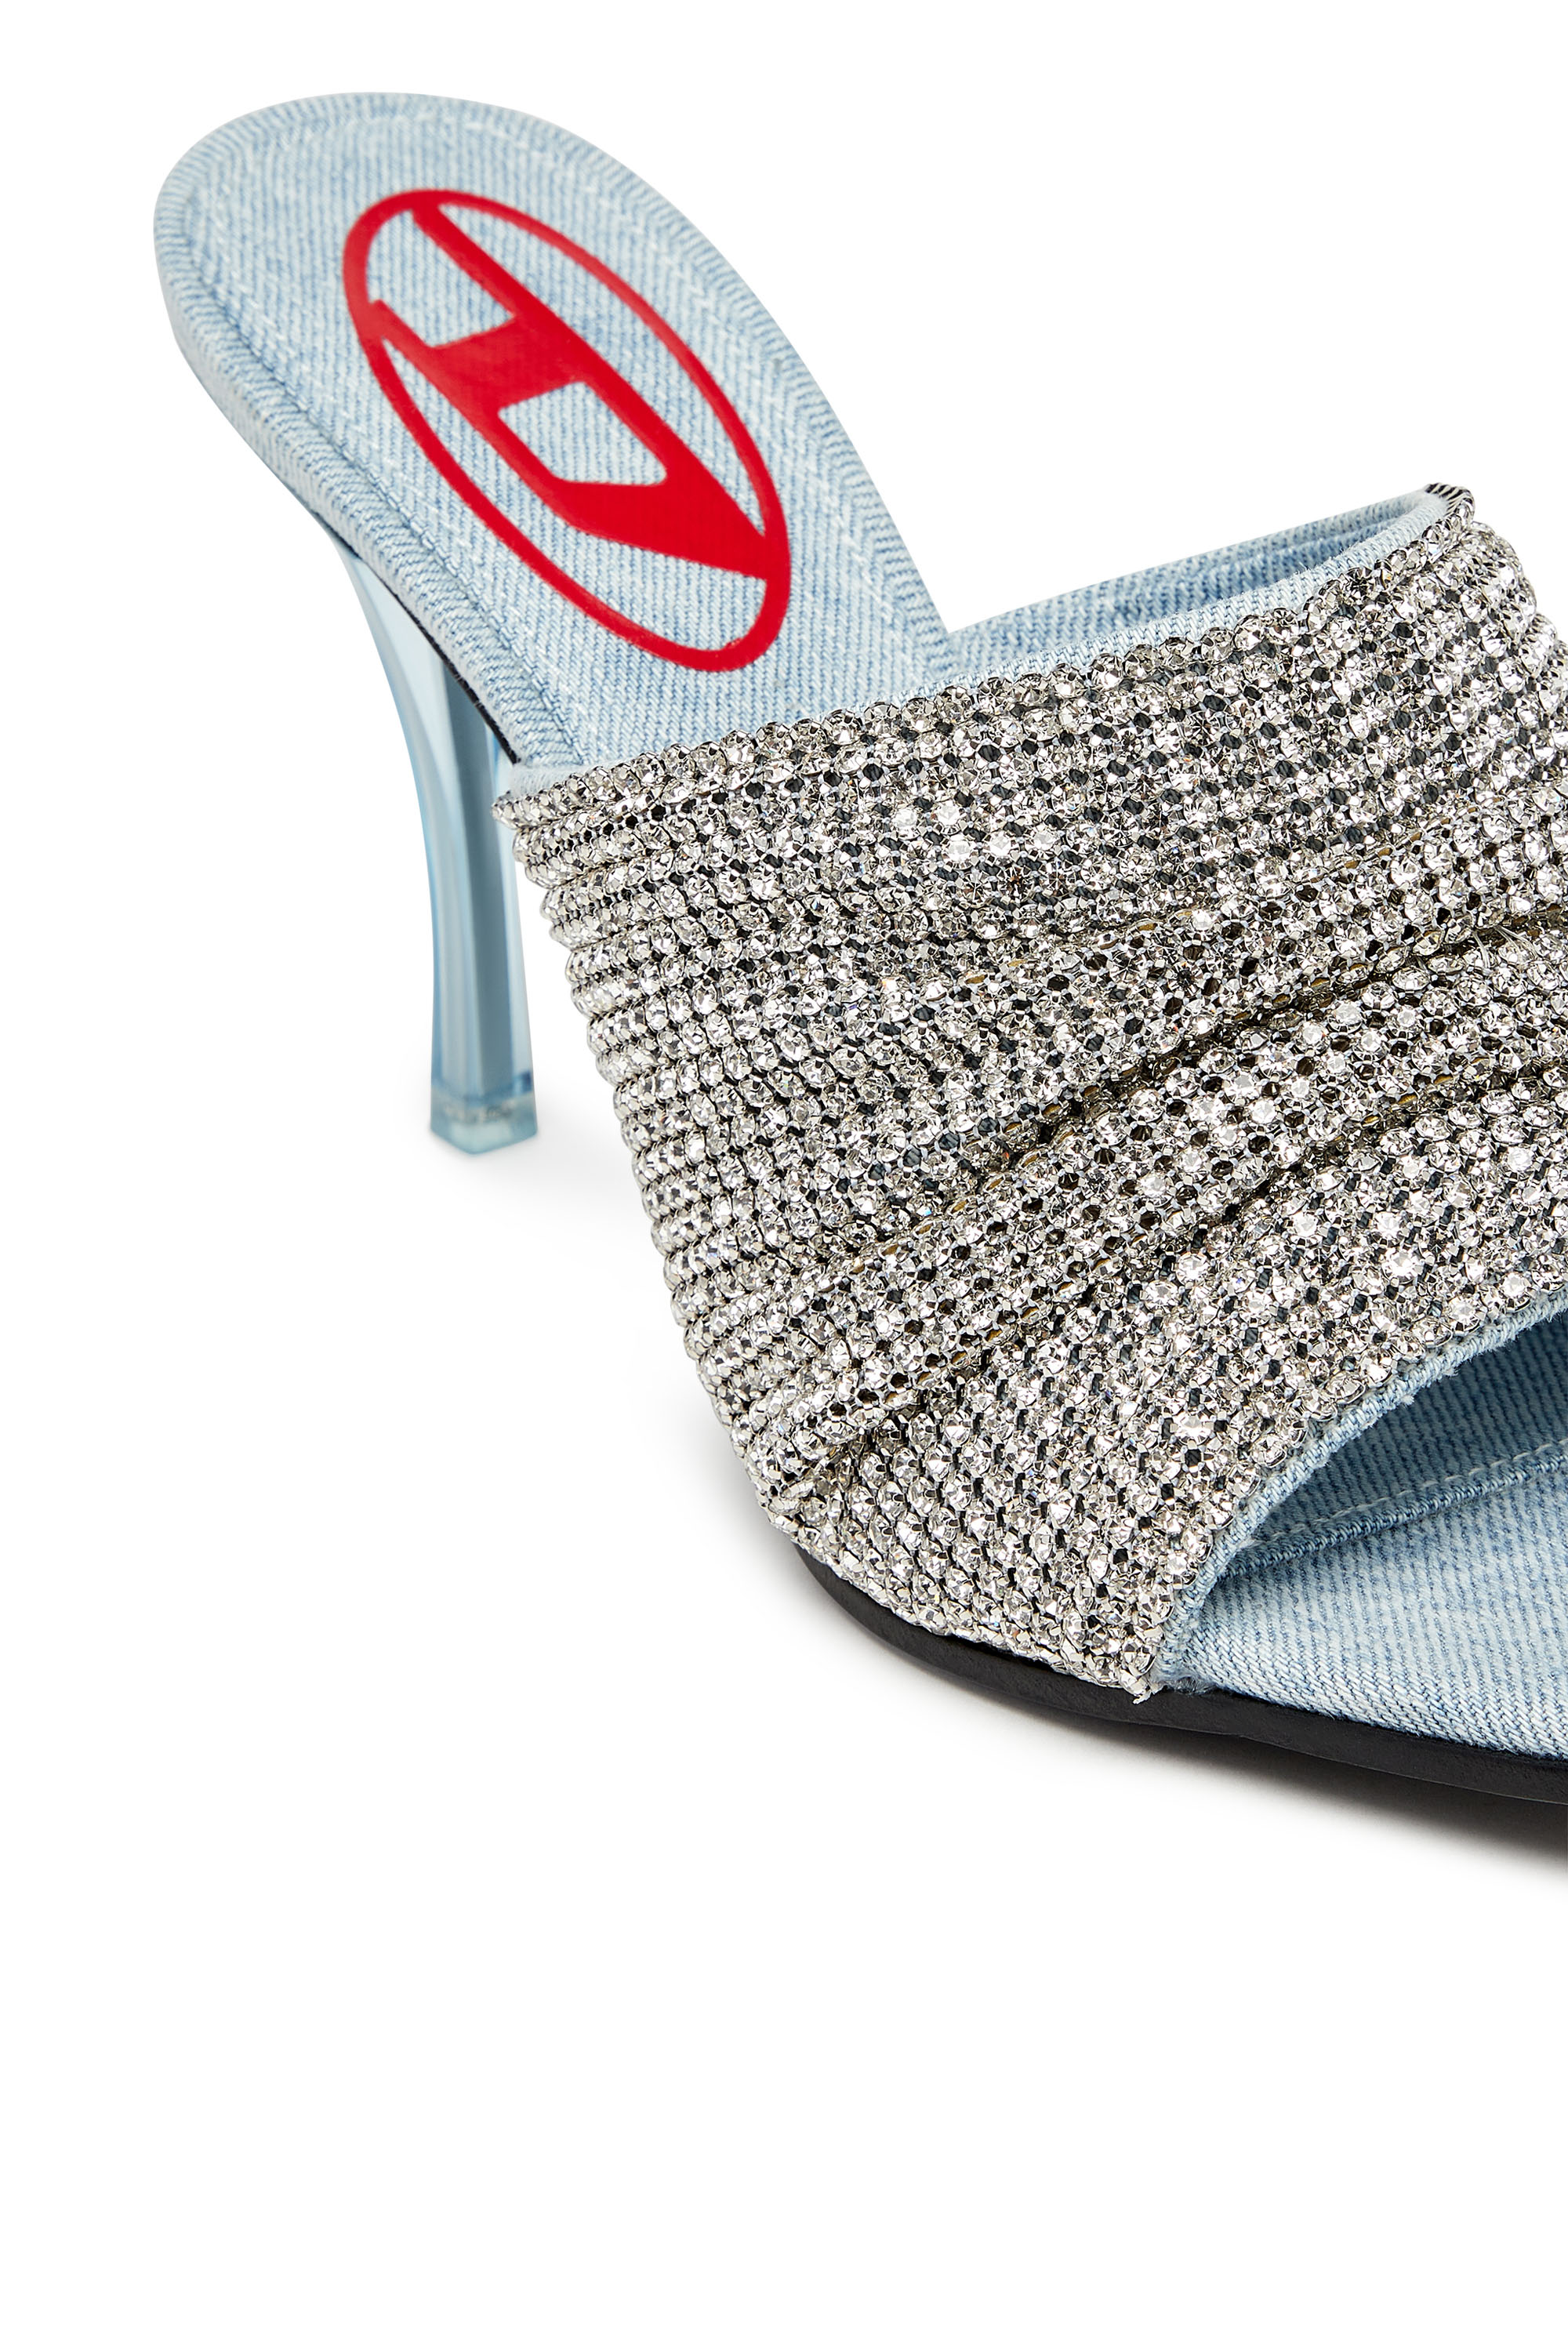 Diesel - D-SYDNEY SDL S, Woman D-Sydney Sdl S Sandals - Mule sandals with rhinestone band in Silver - Image 5